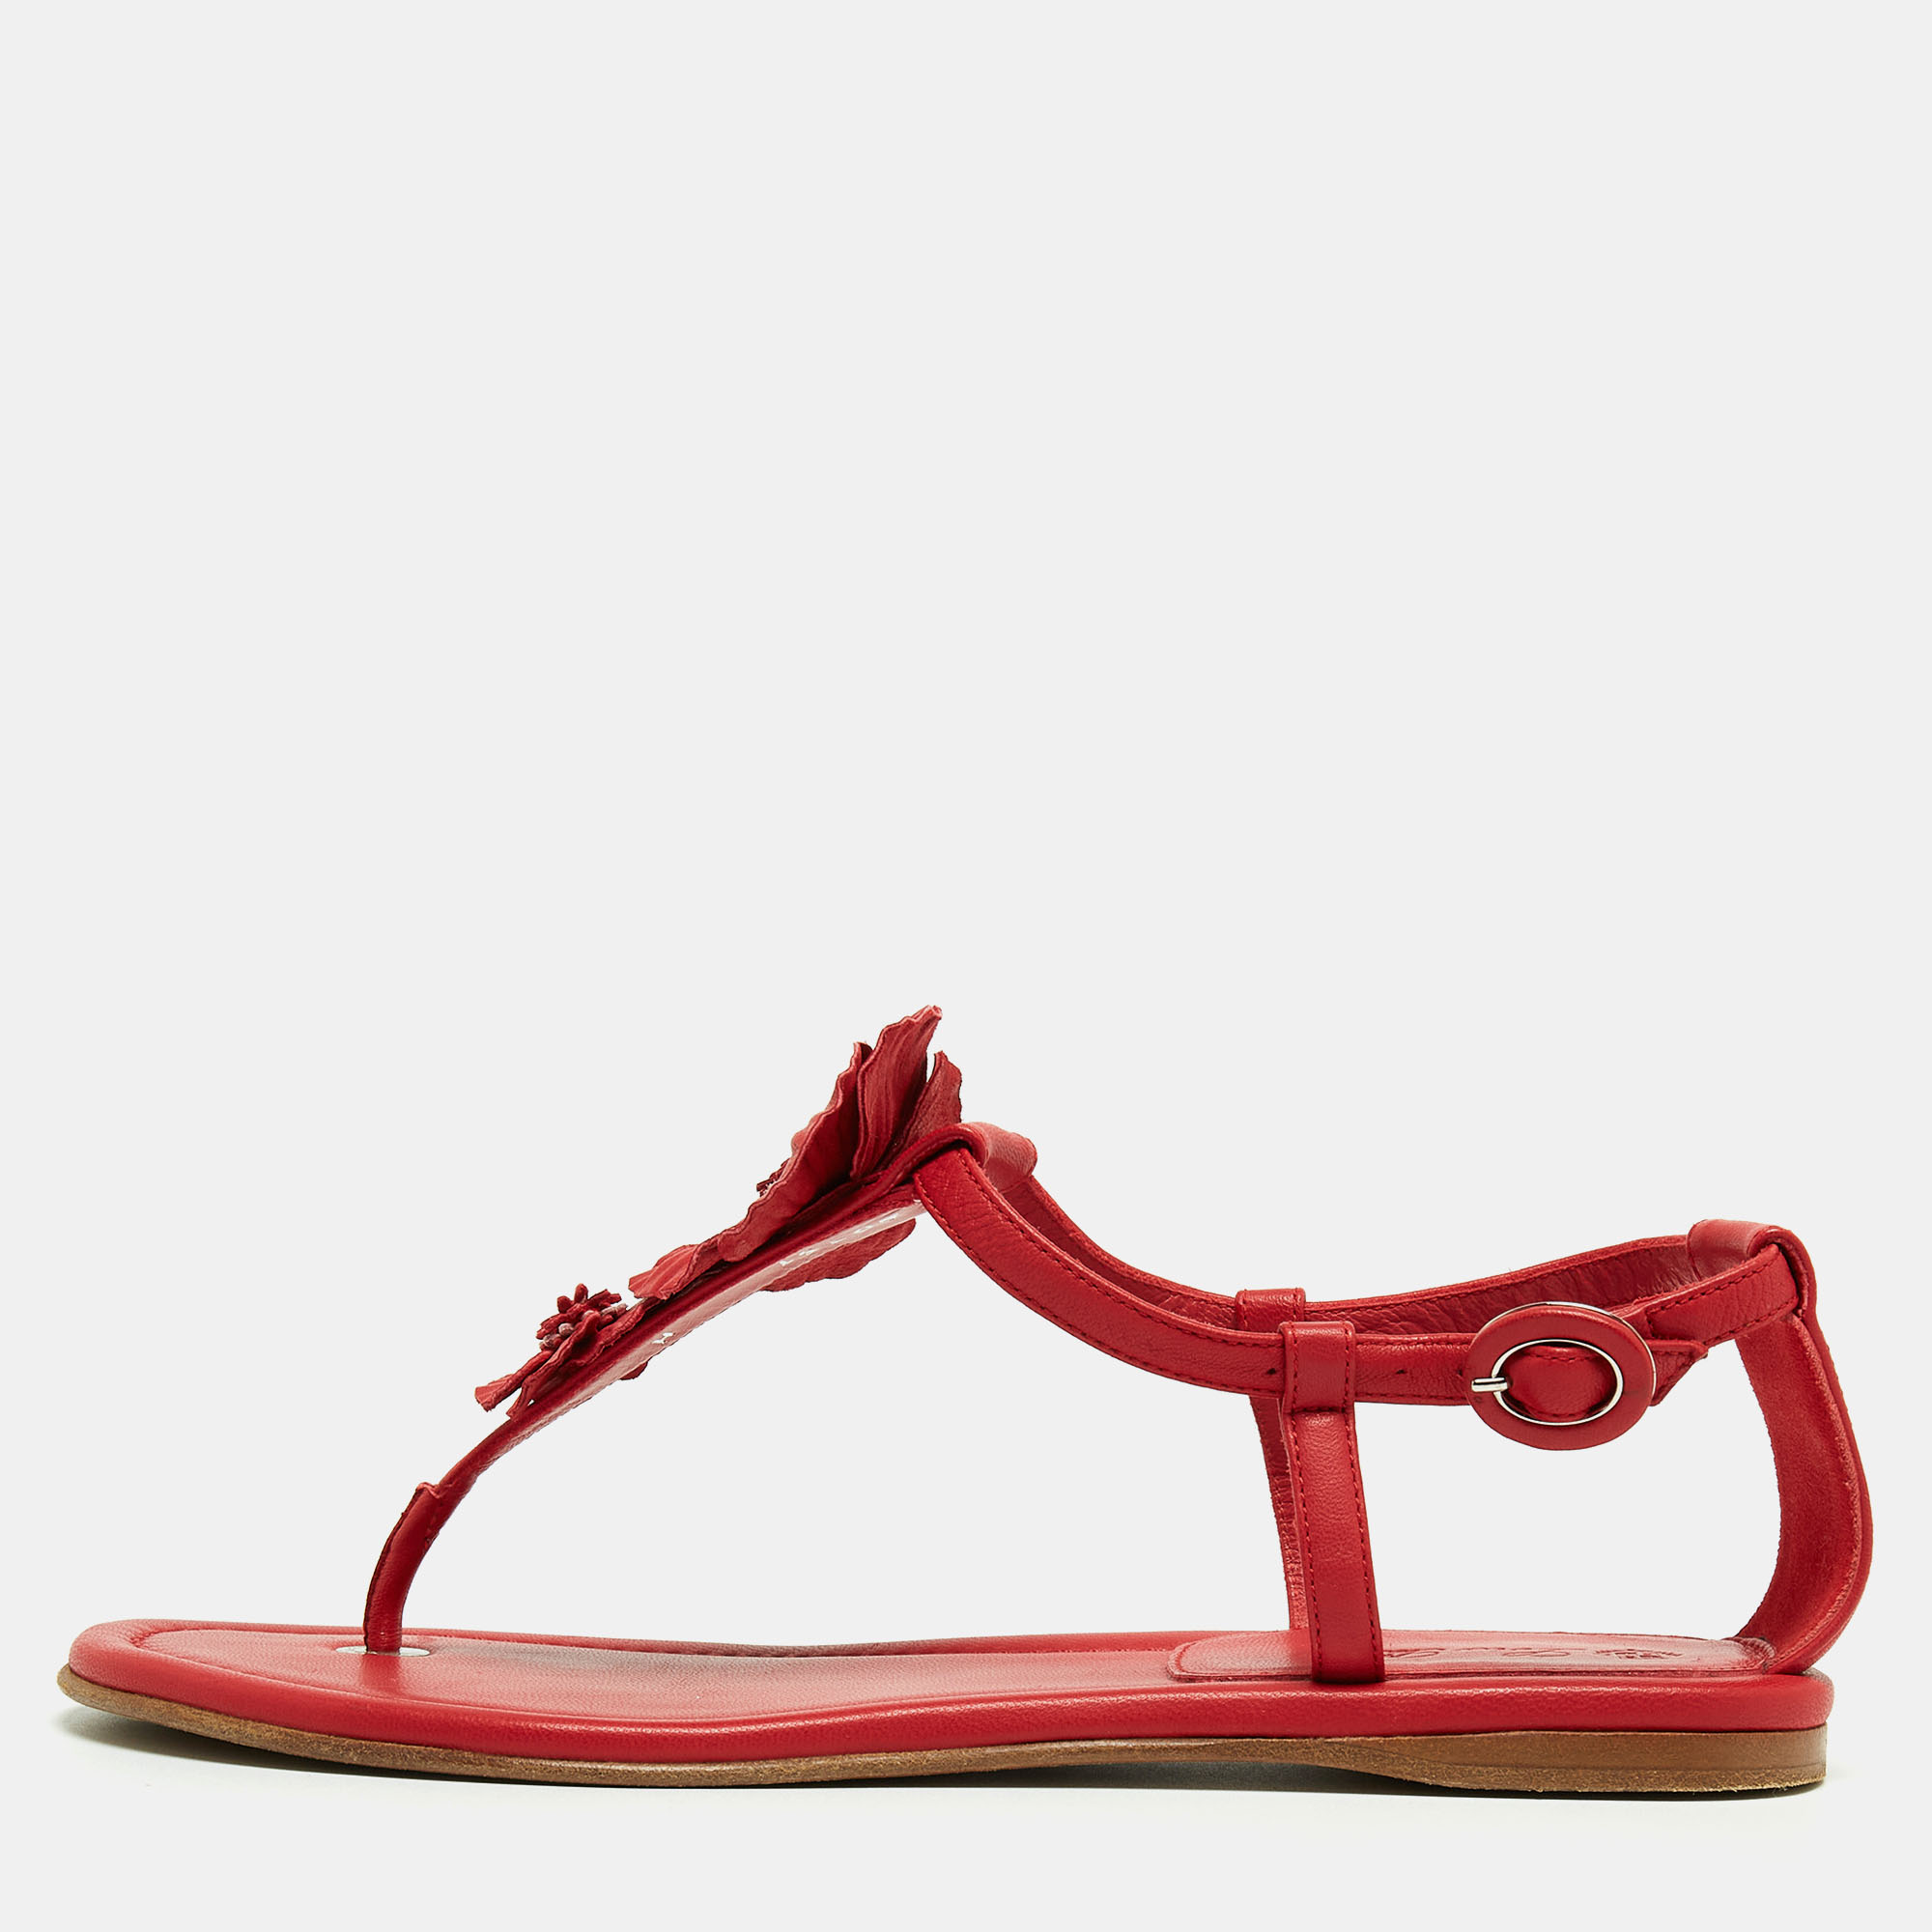 Loro Piana Red Leather Floral Applique Ankle Strap Flat Sandals Size 37